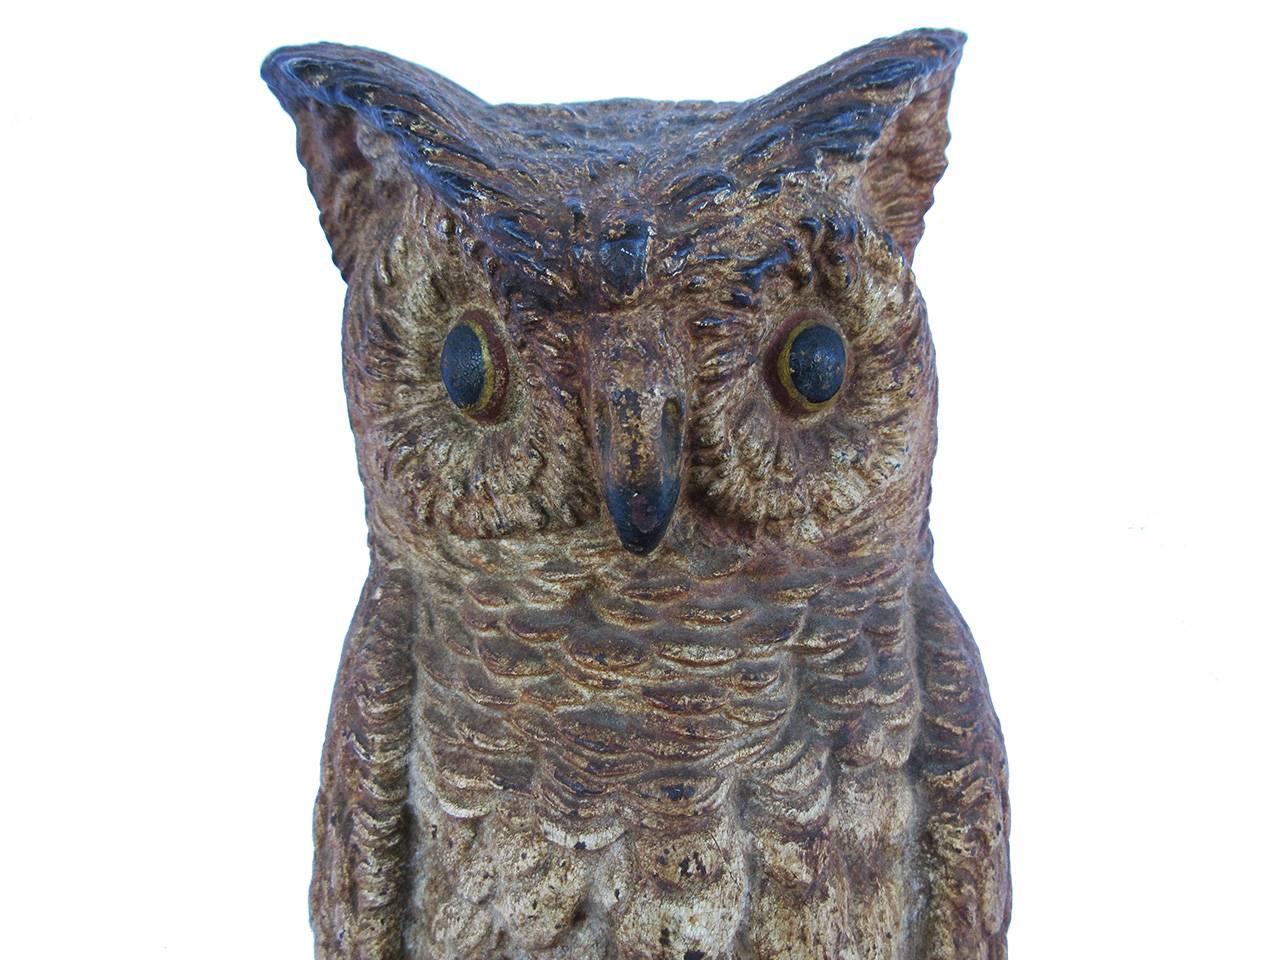 Bradley & Hubbard best in kind cast iron large-scale owl doorstop showing great detail to the casting, exceptional and original age cracked painted surface, original condition, marked B&H on the backside, circa 1900.